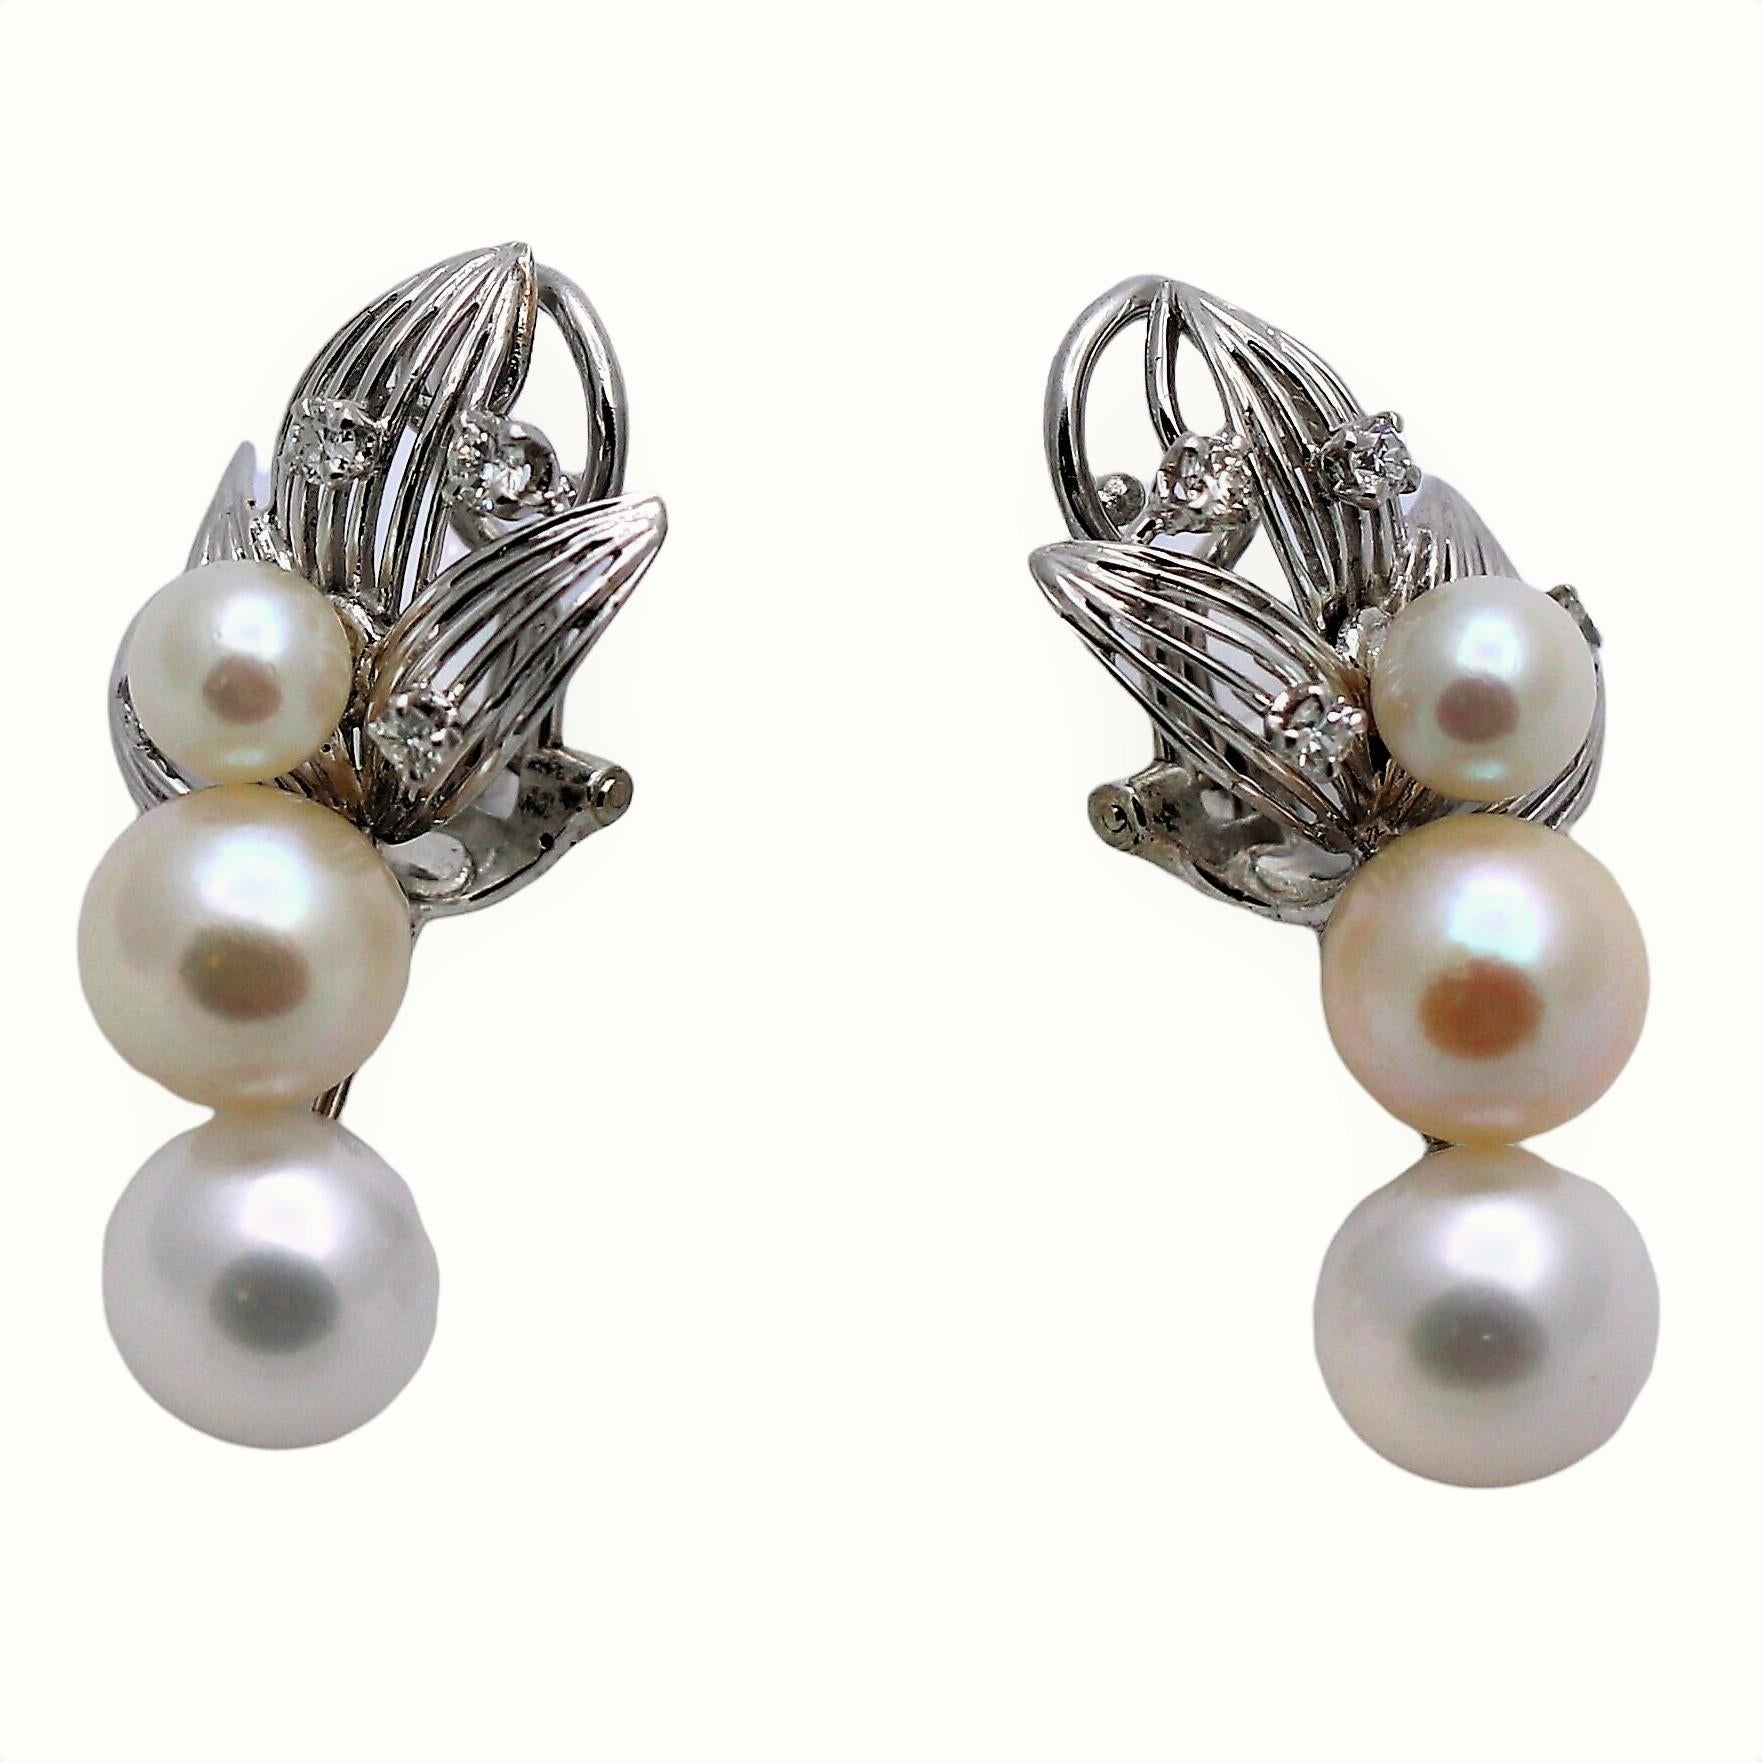 The earring tops are a delicate open wire work of 18K white gold petals, set with eight fine quality single cut diamonds, having a total approximate weight of .33ct. From this motif drop three Akoya cultured pearls, graduating from 6mm to 9mm. Each